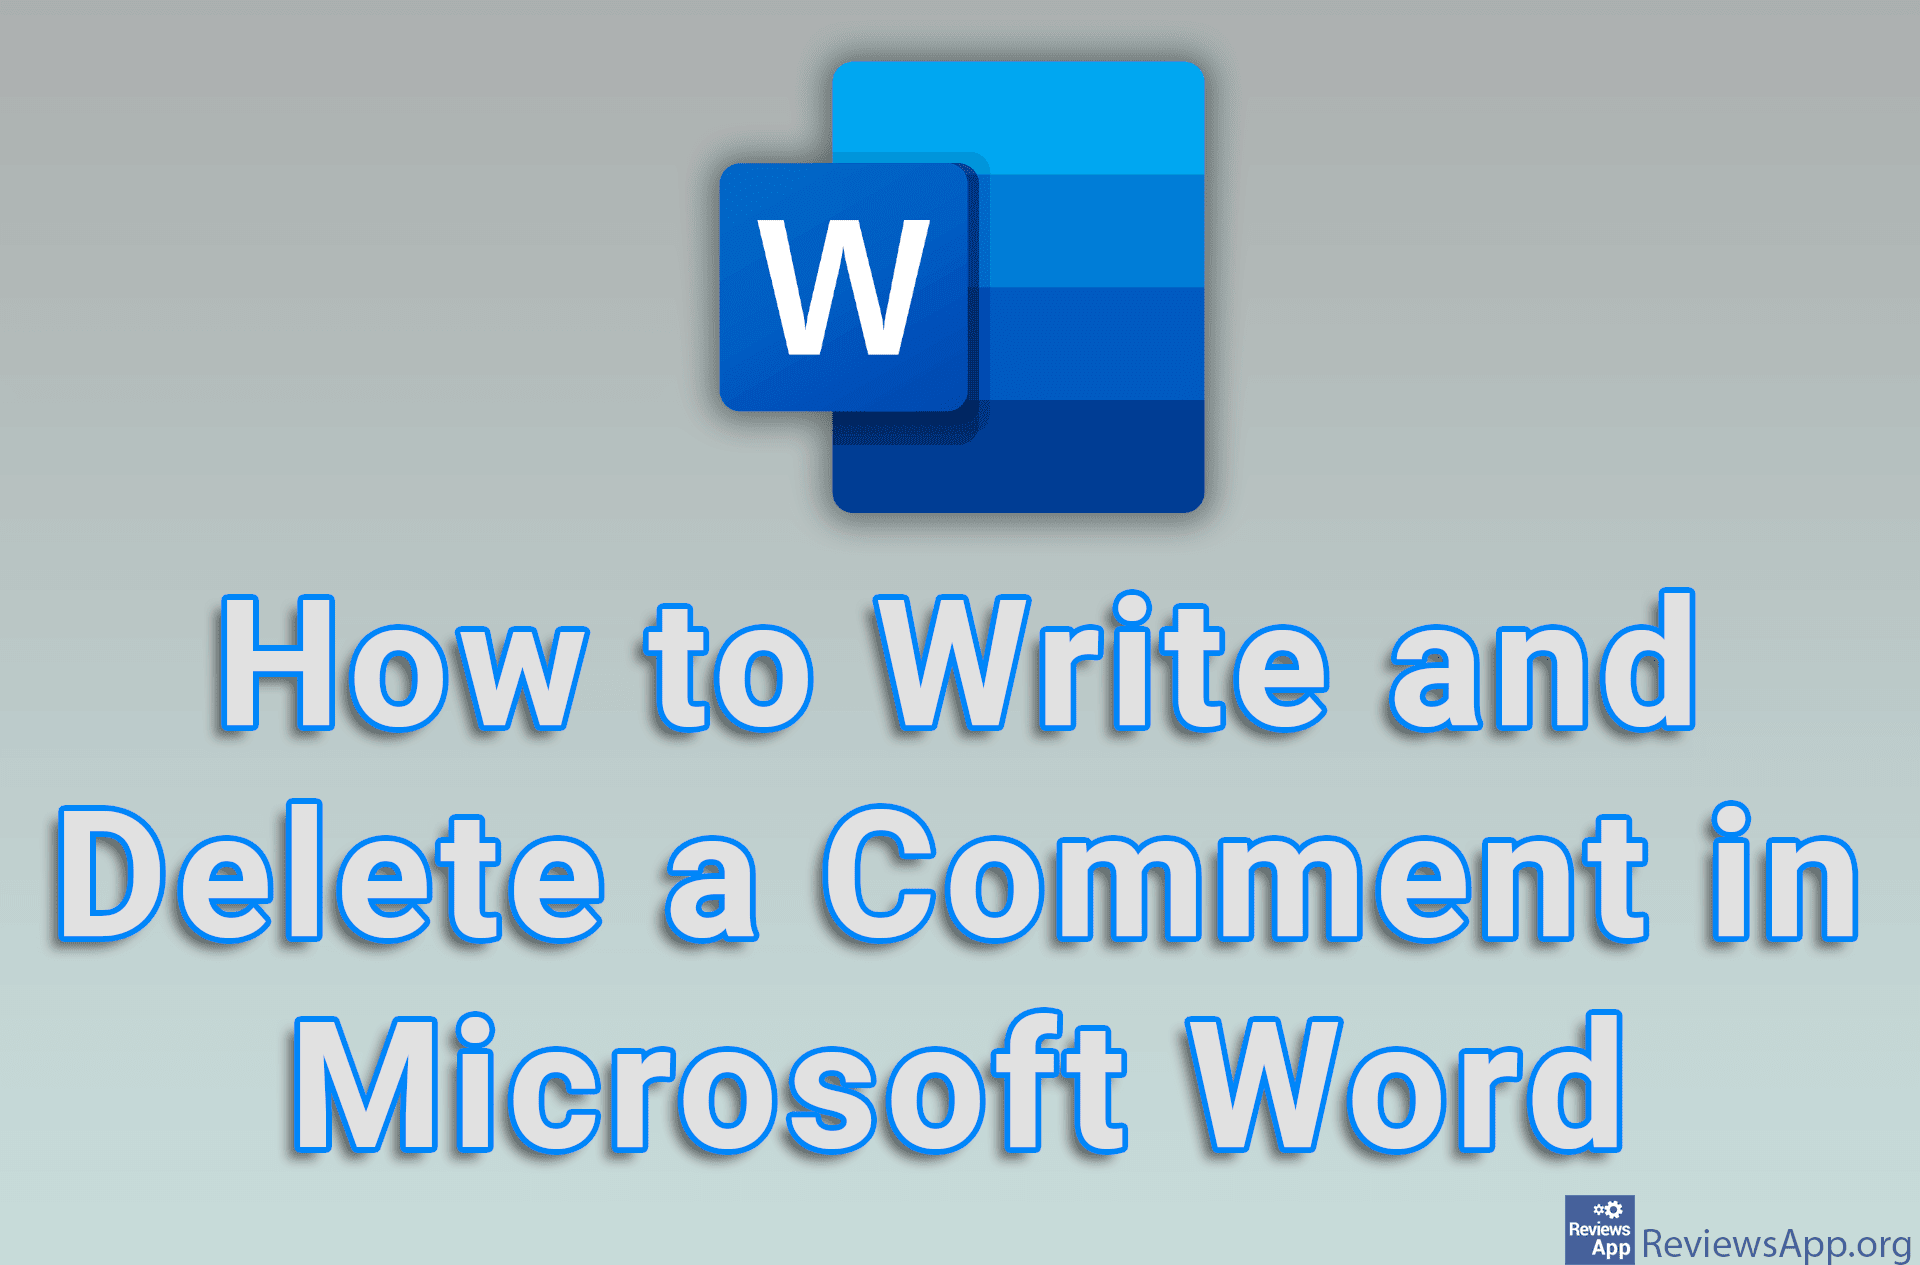 How to Write and Delete a Comment in Microsoft Word